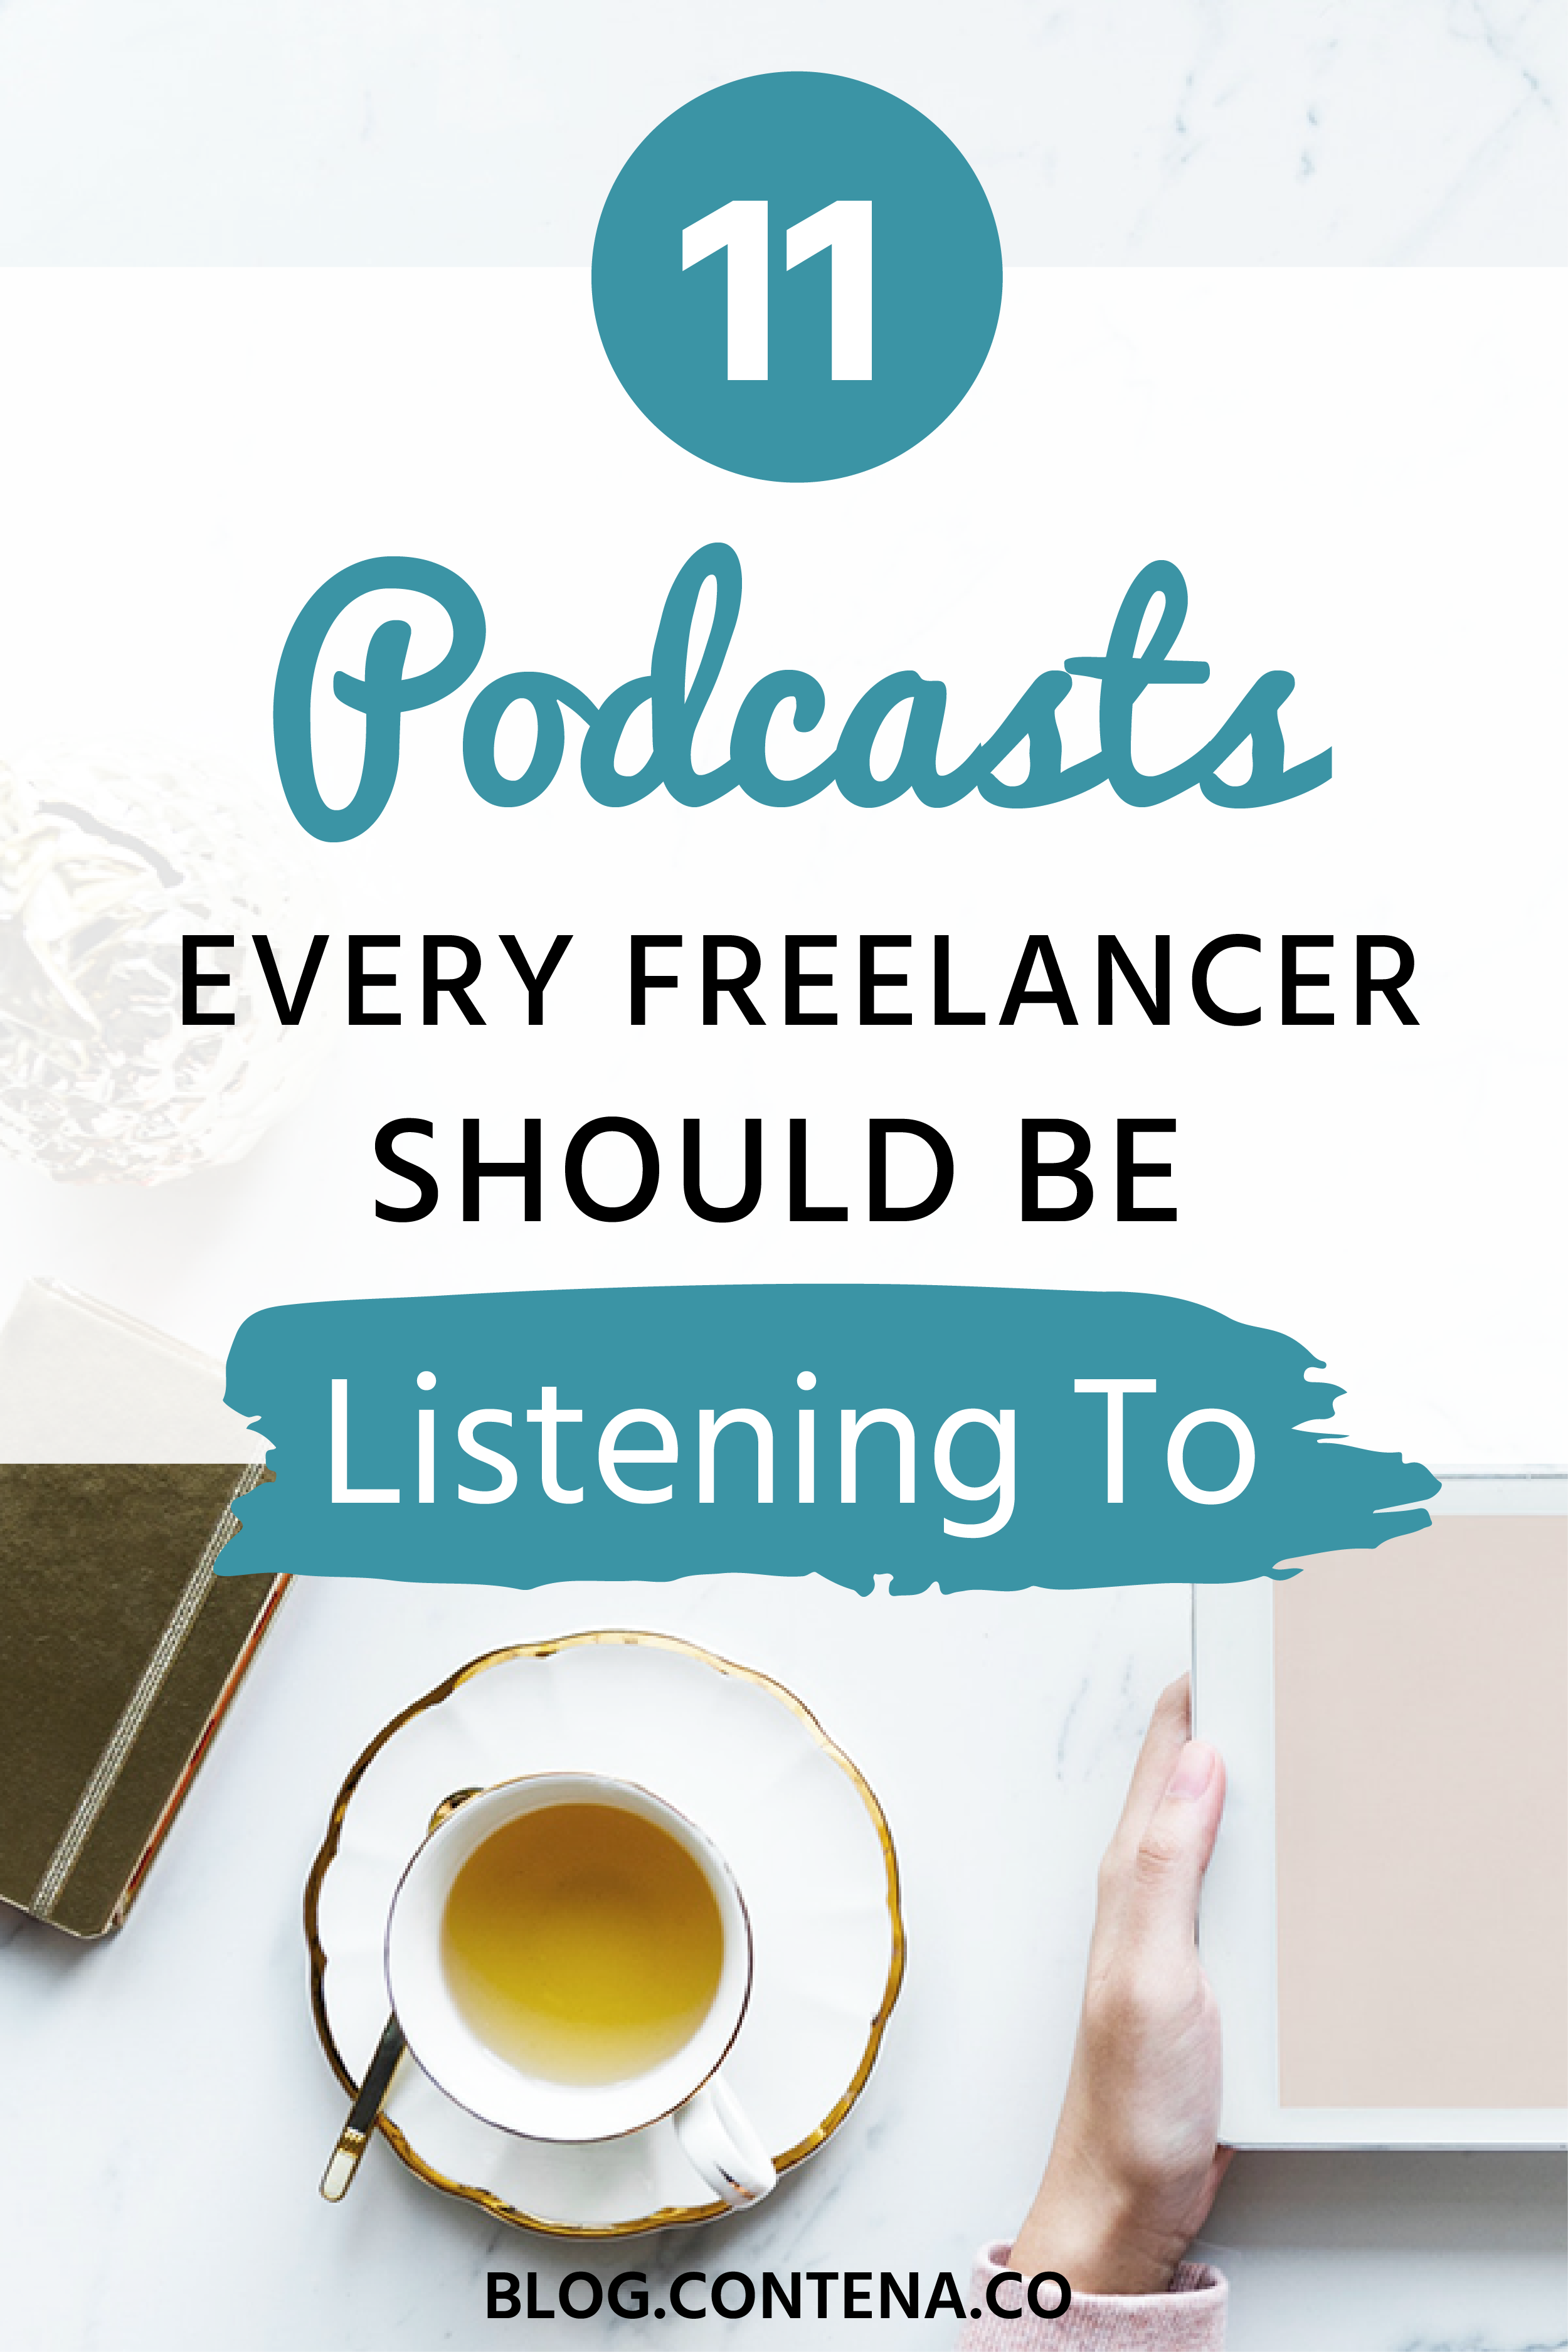 These are the 11 best podcasts for freelance writers. From writing inspiration to being a better writer and growing your freelancing business, these podcasts will give you the tips and ideas you need for freelance writing. #Podcasts #Tips #FreelanceWriting #Freelancer #WorkFromHome #SideHustle #Money #OnlineBusiness #Writing #WritingJobs #Money